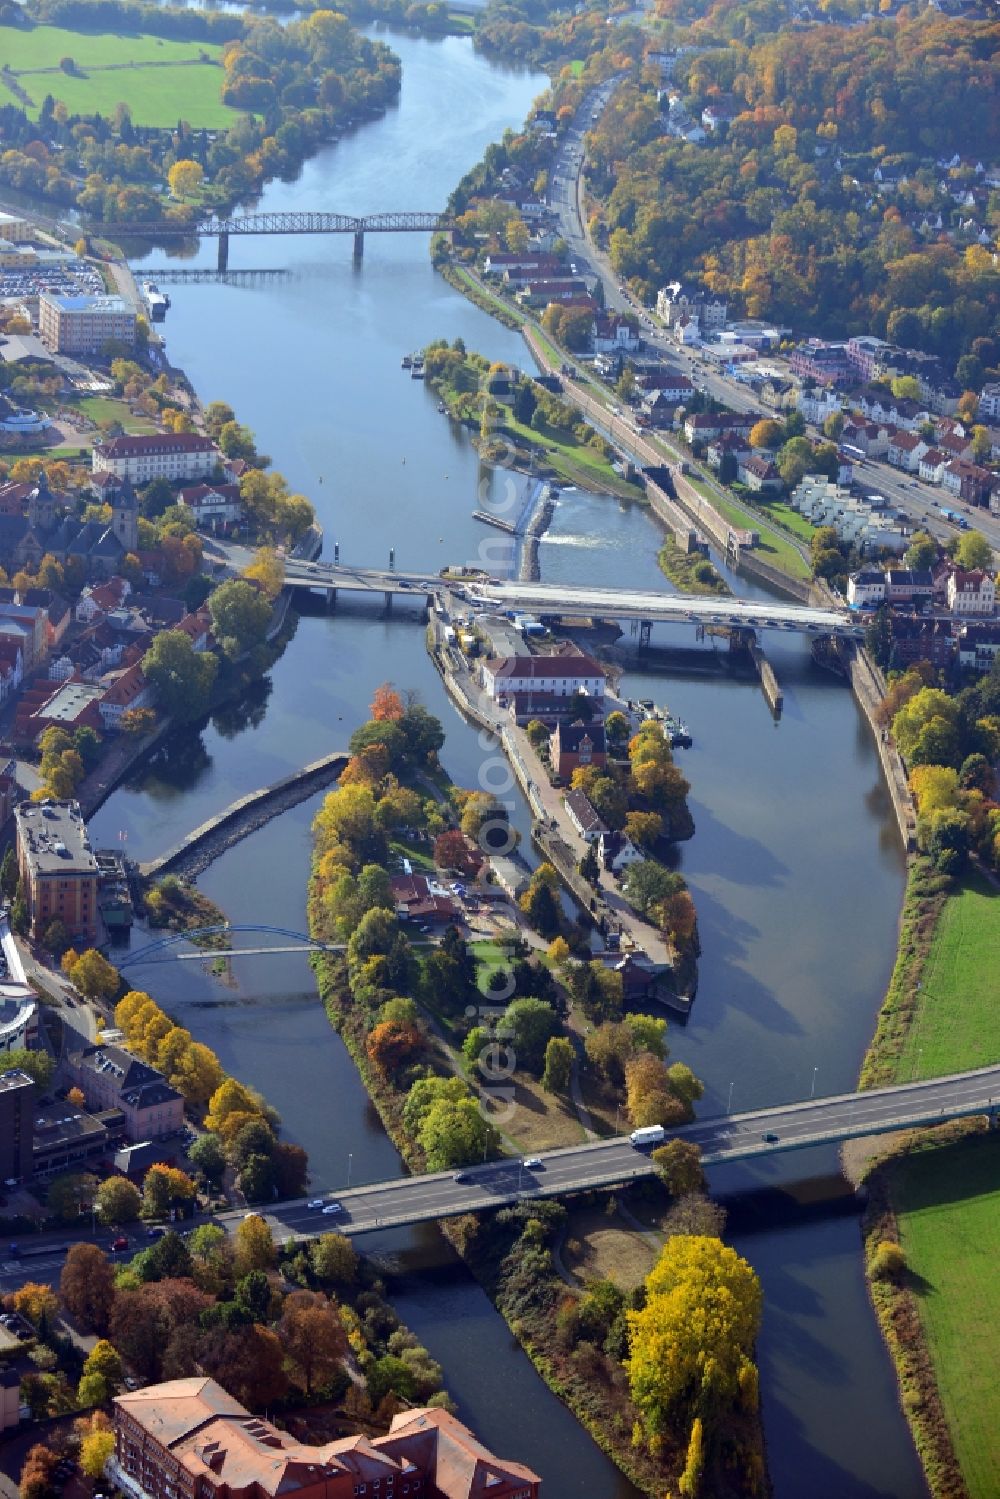 Hameln from above - View of the Alte Schleuse (Old Lock) in Hamelin in the state Lower Saxony. Today the old lock is used as a hydroelectric power station for the generation electric power generation